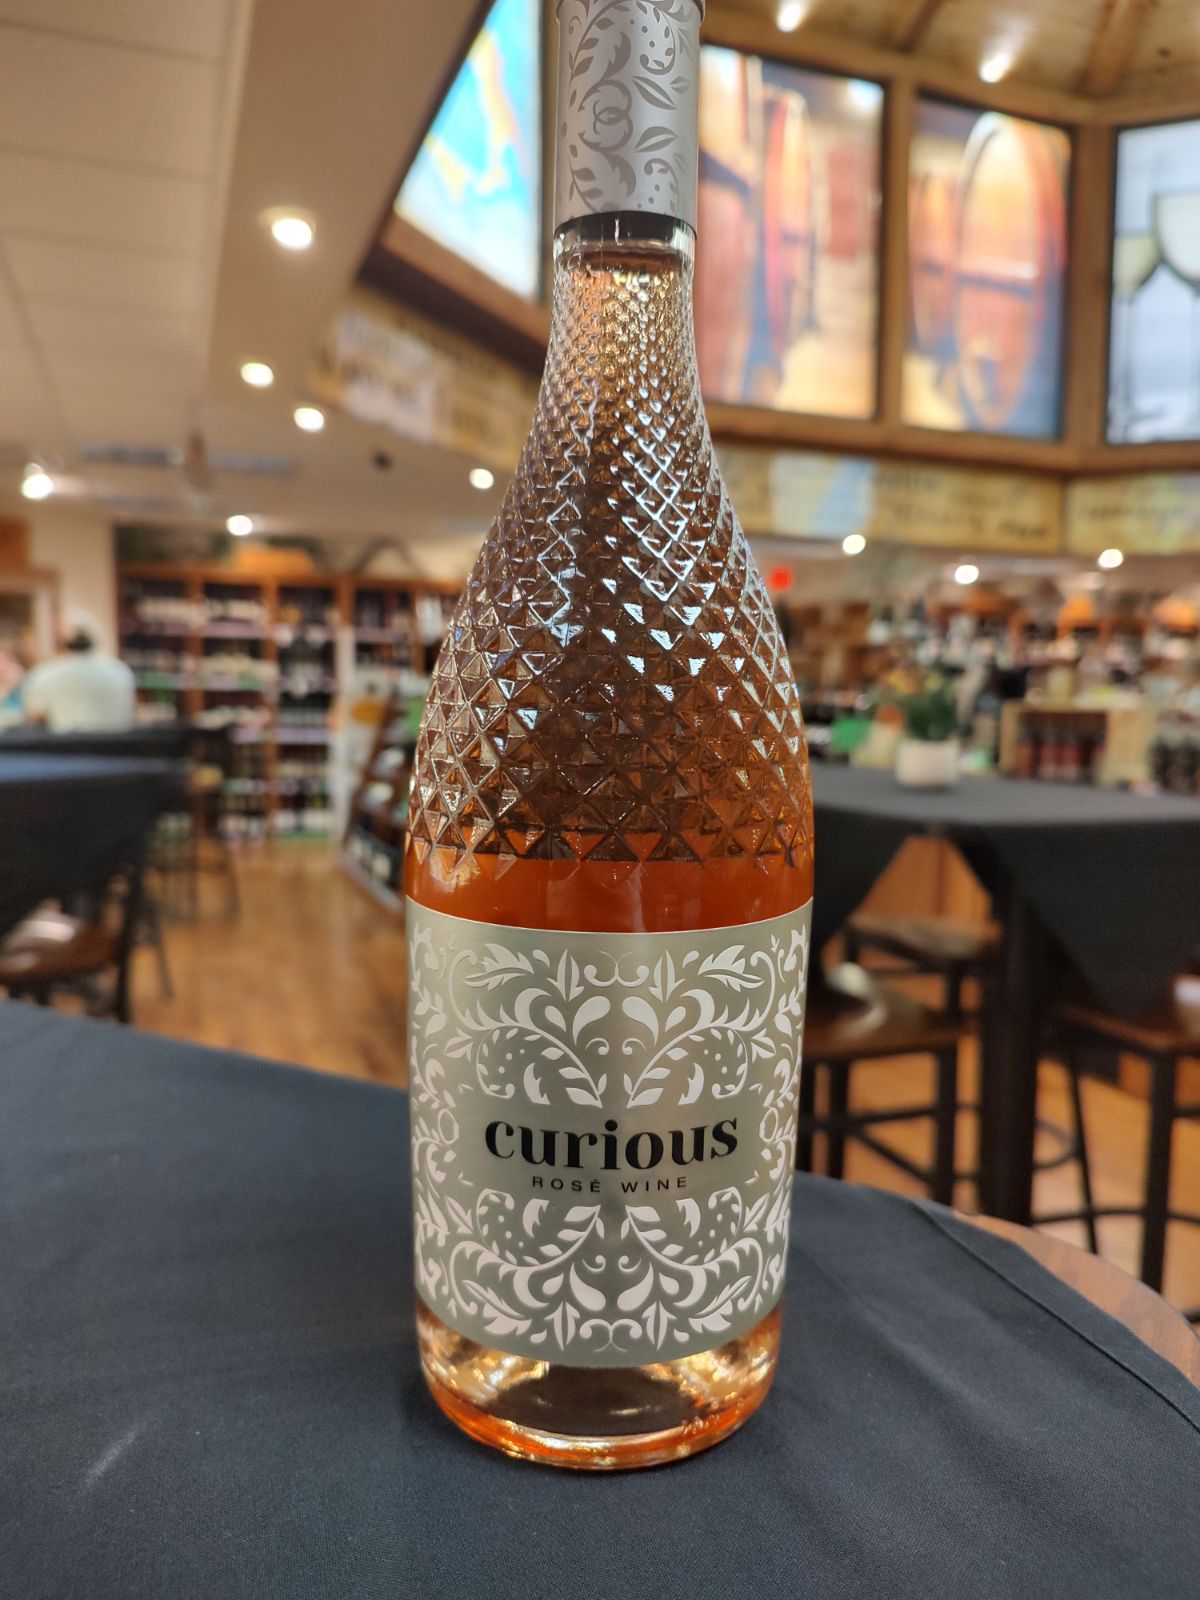 A bottle of Curious rosé wine sits on a table at Macadoodles